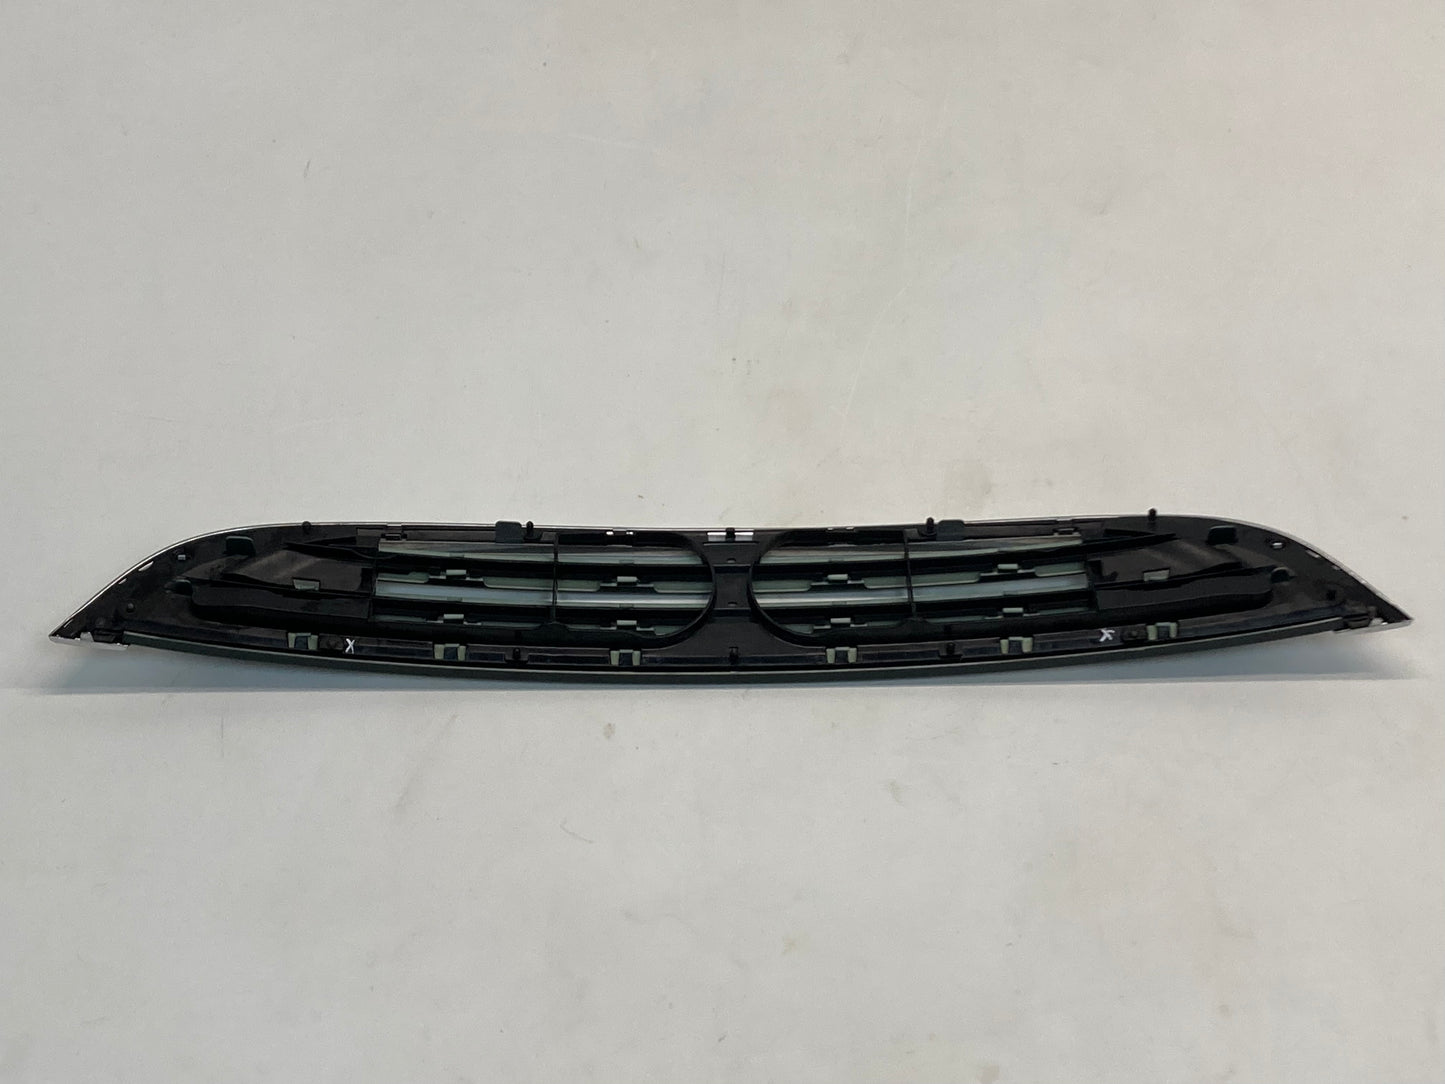 Mini Cooper Front Grille British Racing Green 51137135265 02-08 R53 R52 423